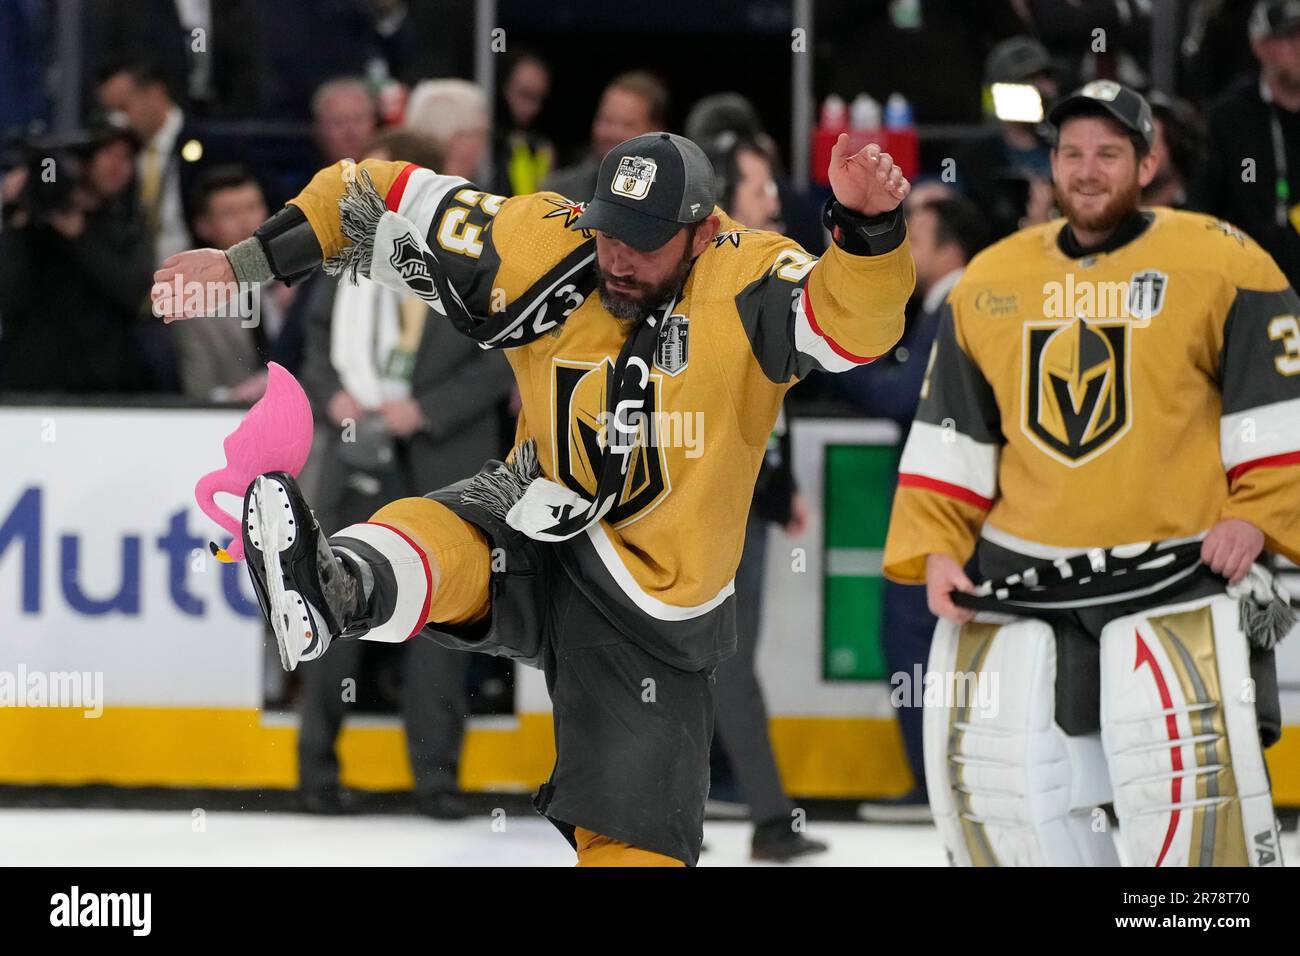 https://c8.alamy.com/comp/2R78T70/vegas-golden-knights-defenseman-alec-martinez-left-kicks-a-plastic-flamingo-as-backup-goaltender-jonathan-quick-watches-after-the-knights-defeated-the-florida-panthers-9-3-in-game-5-of-the-nhl-hockey-stanley-cup-finals-tuesday-june-13-2023-in-las-vegas-the-knights-won-the-series-4-1-ap-photojohn-locher-2R78T70.jpg